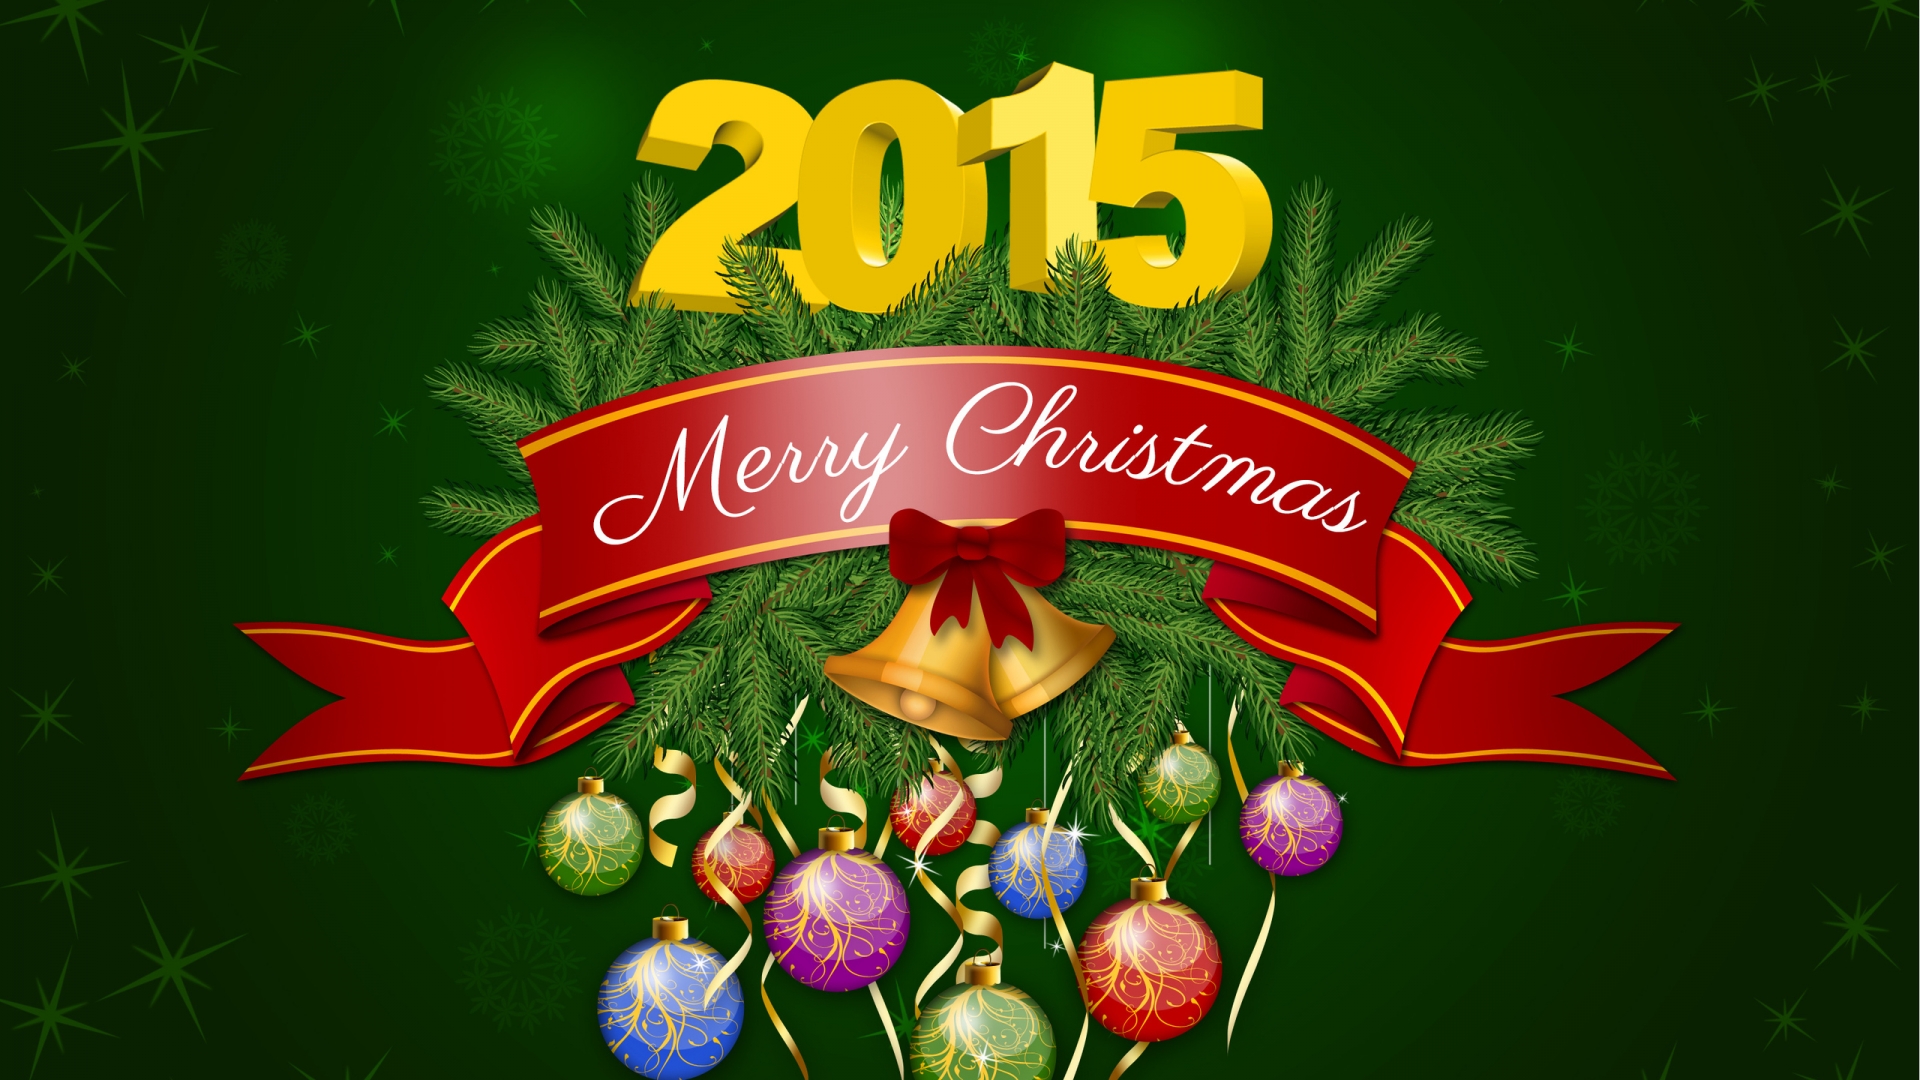 2014 Merry Christmas Poster for 1920 x 1080 HDTV 1080p resolution